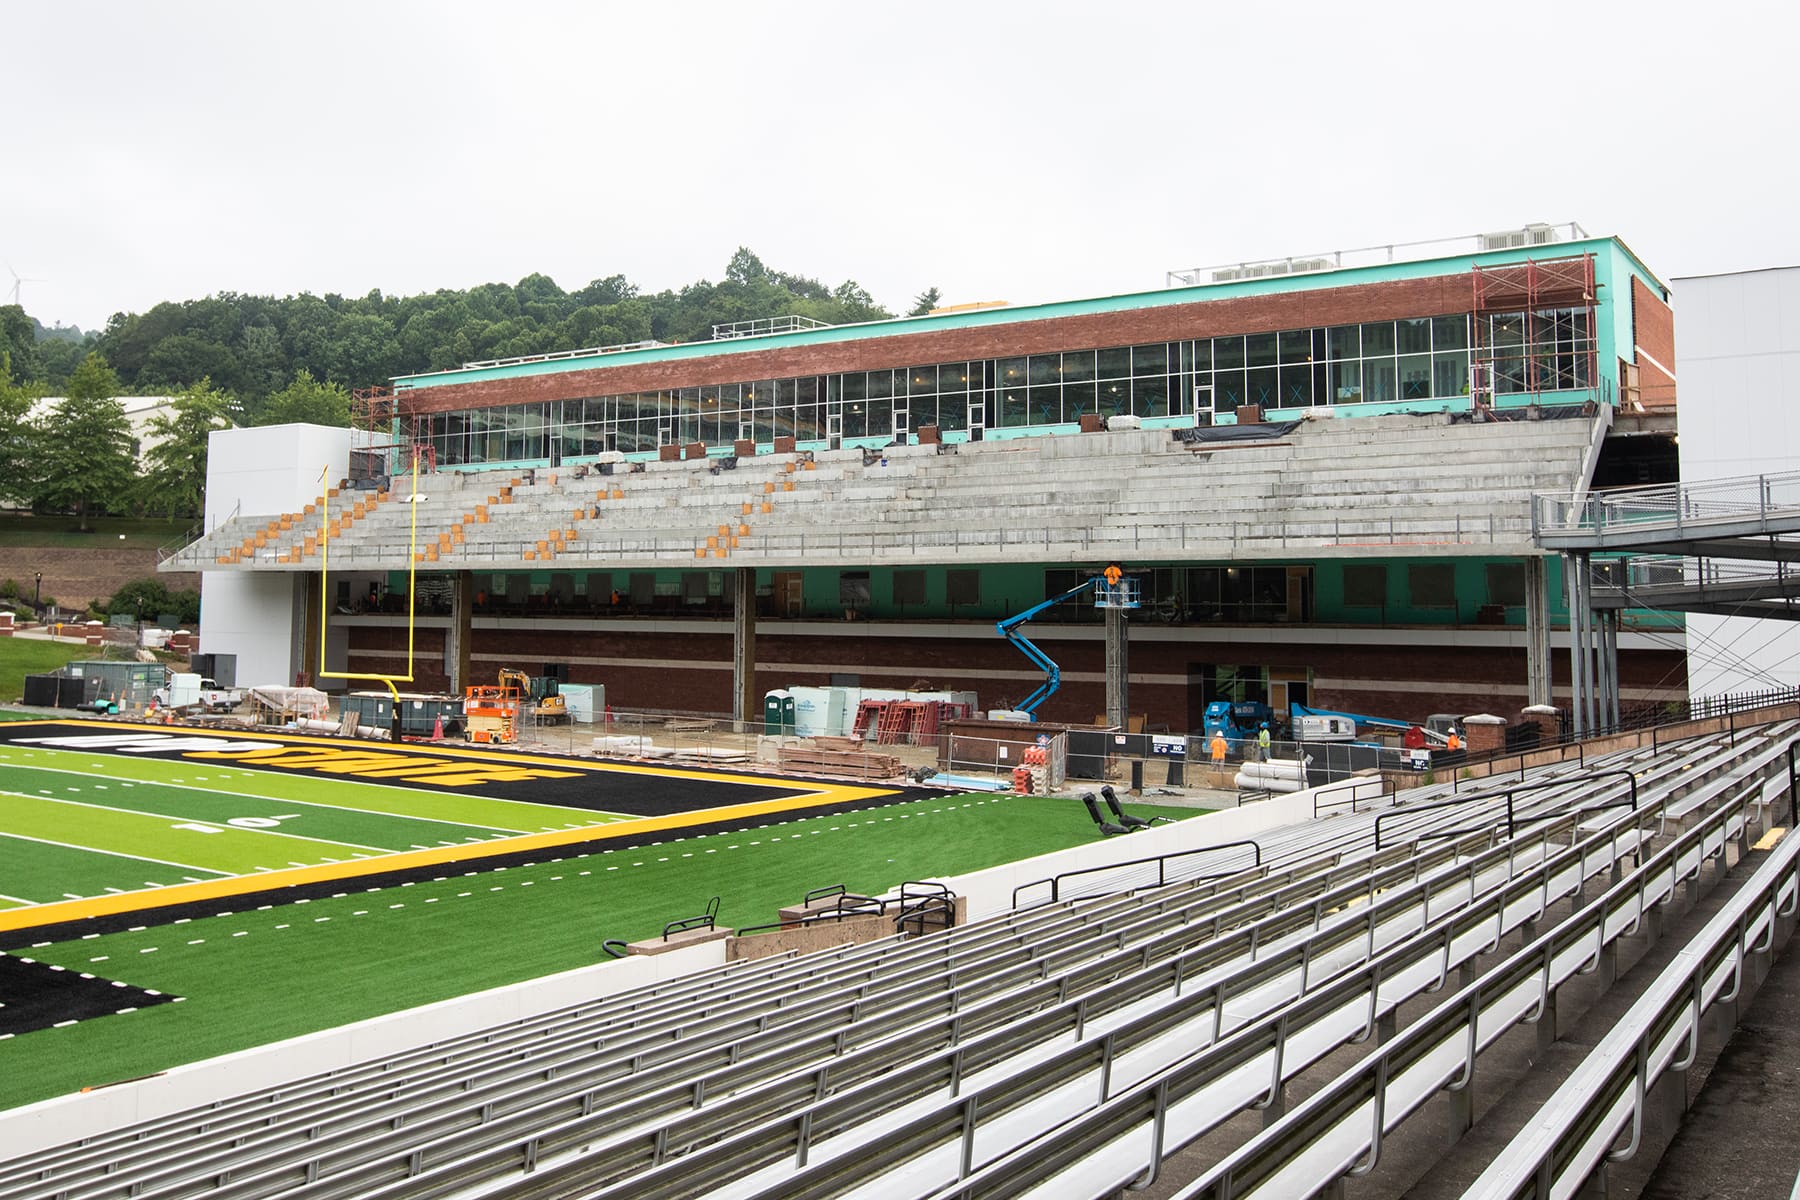 end-zone construction